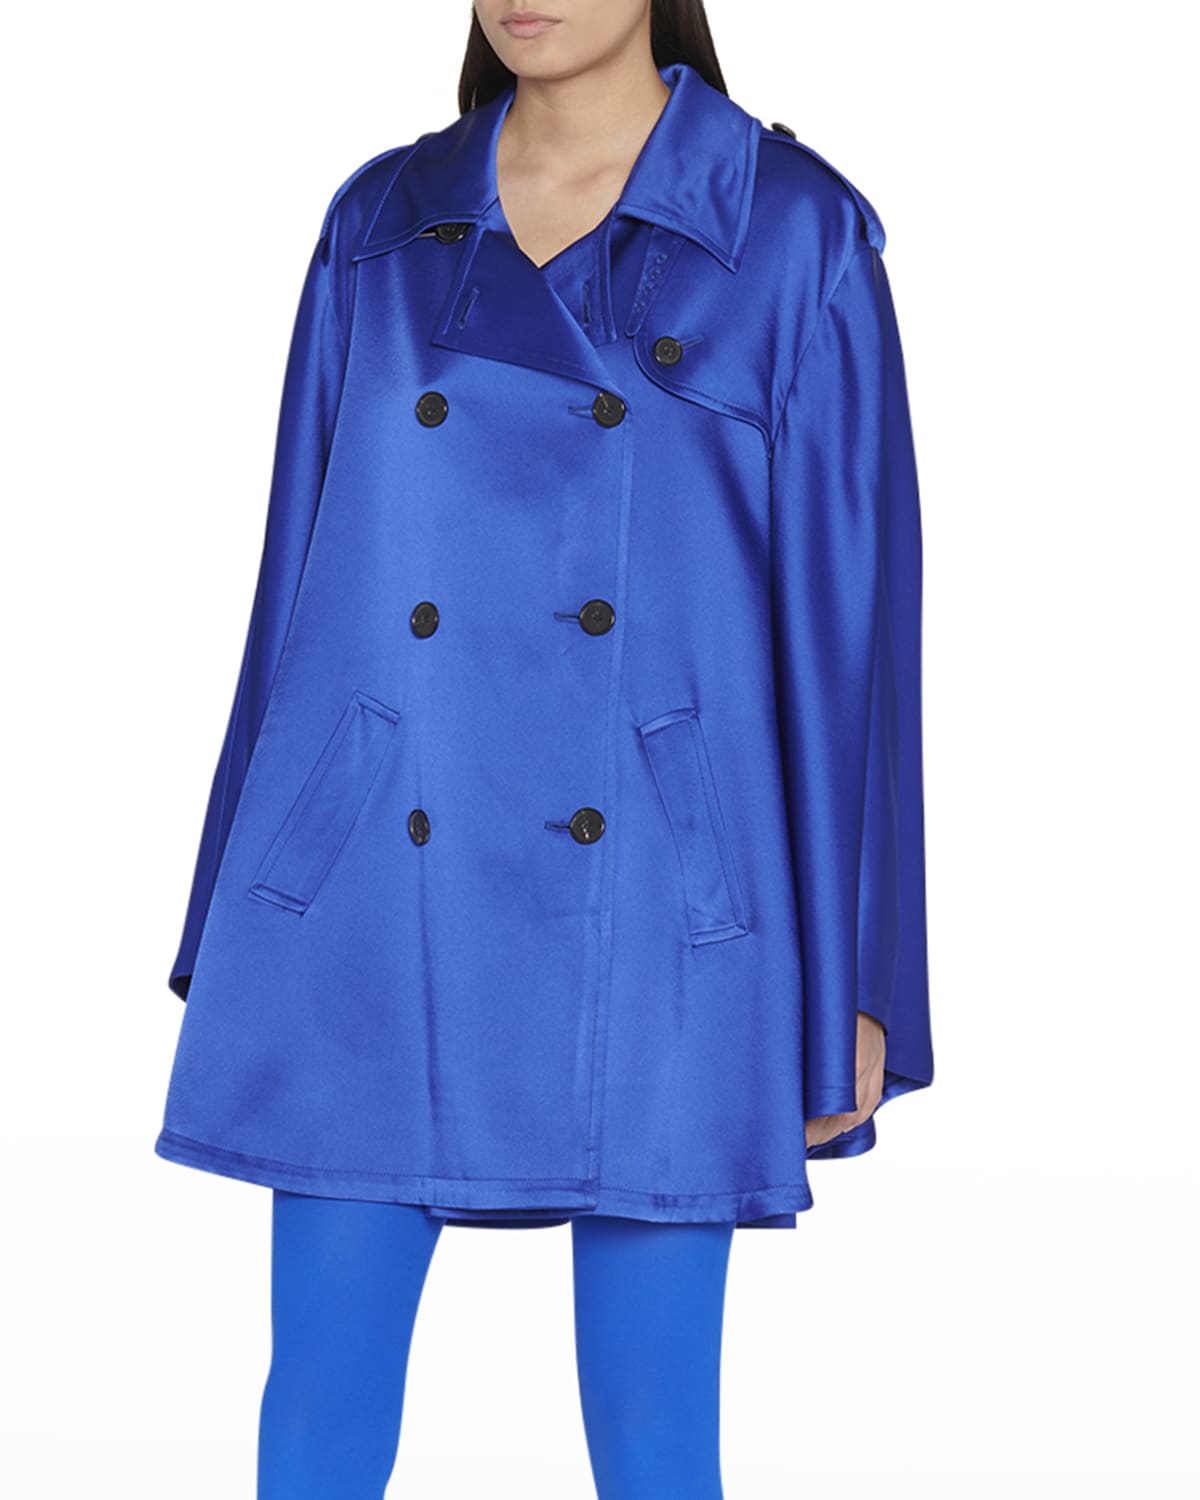 CALLAS Milano Belted Double-Breasted A-Line Trench Coat | Neiman Marcus